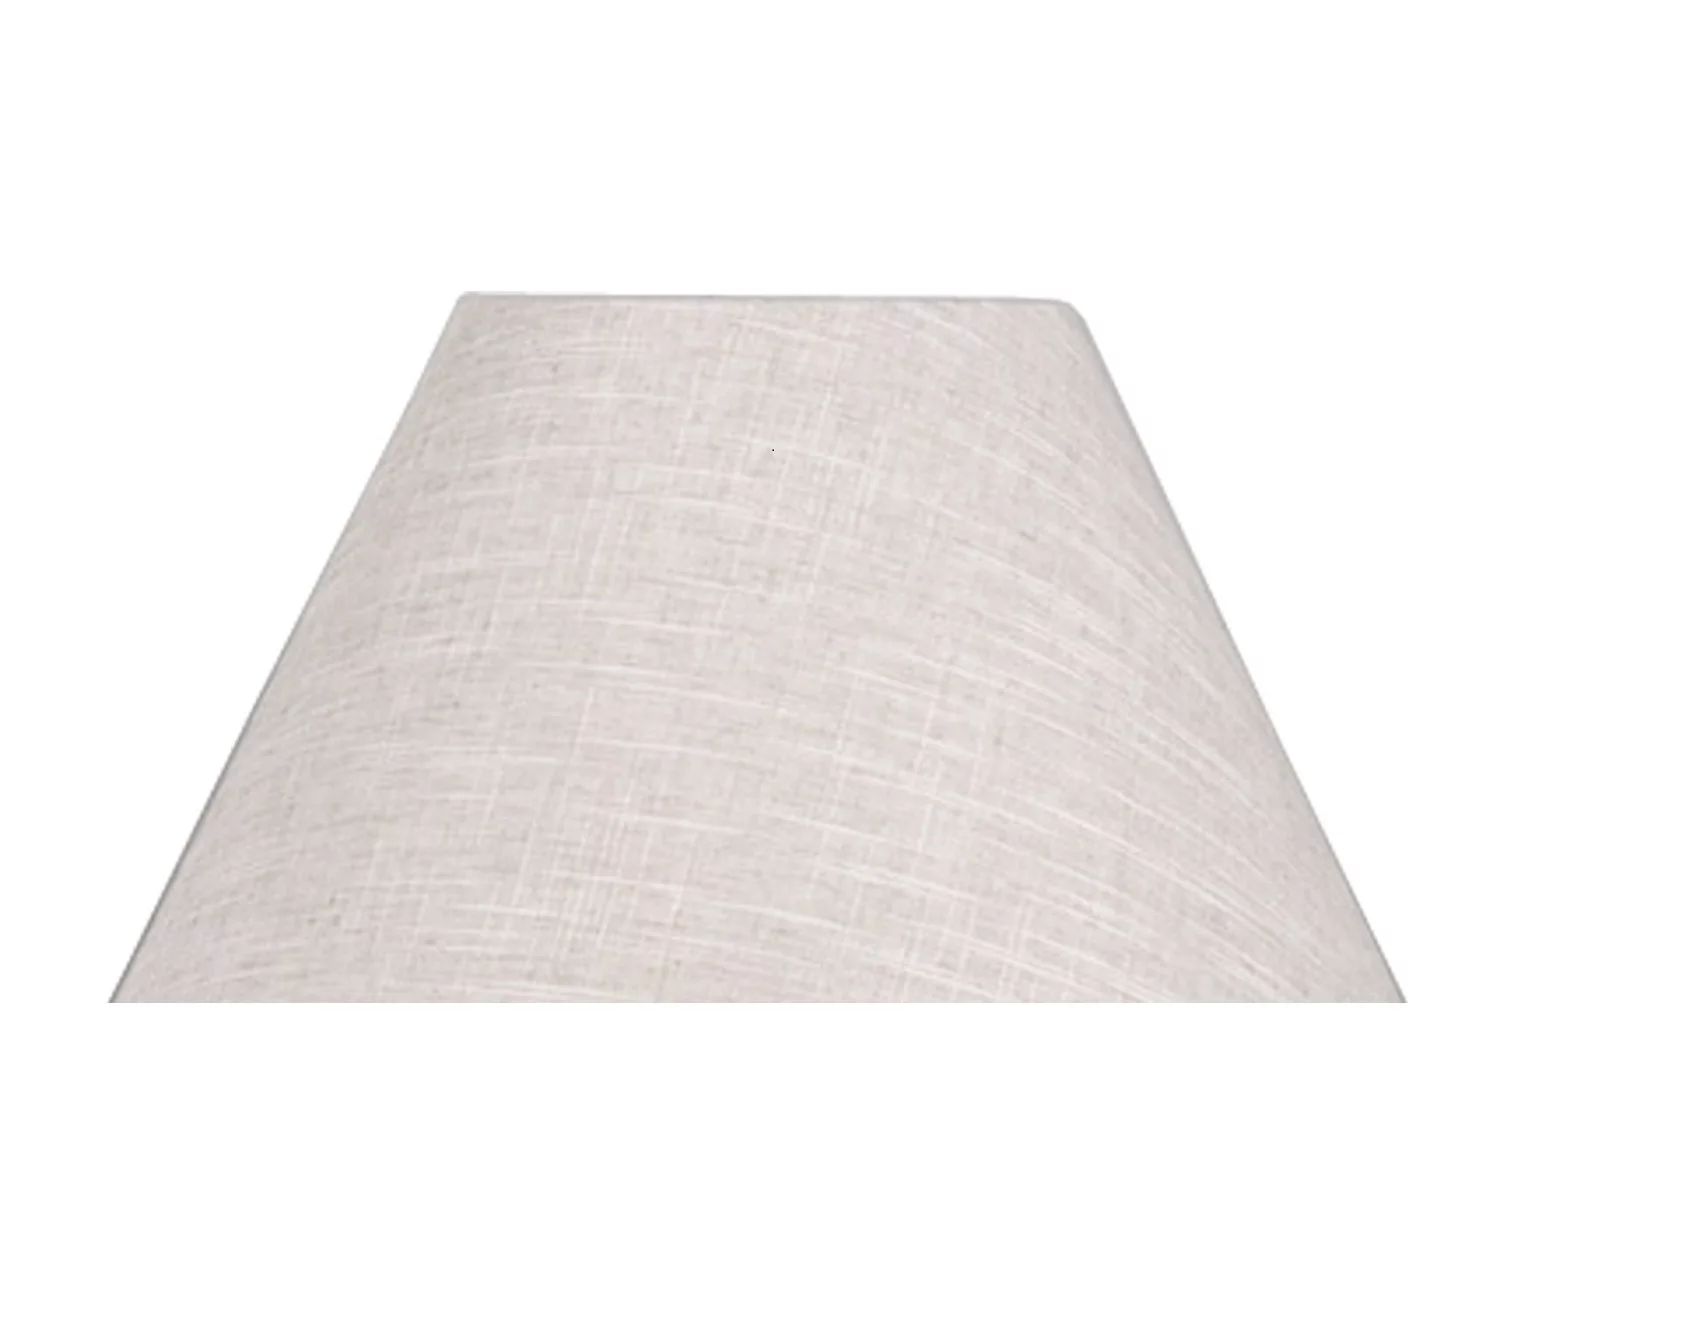 Better Homes & Gardens 7"L x 17"D x 11.5"H Tapered Taupe Empire Lamp Fabric Shade, Adult Use | Walmart (US)